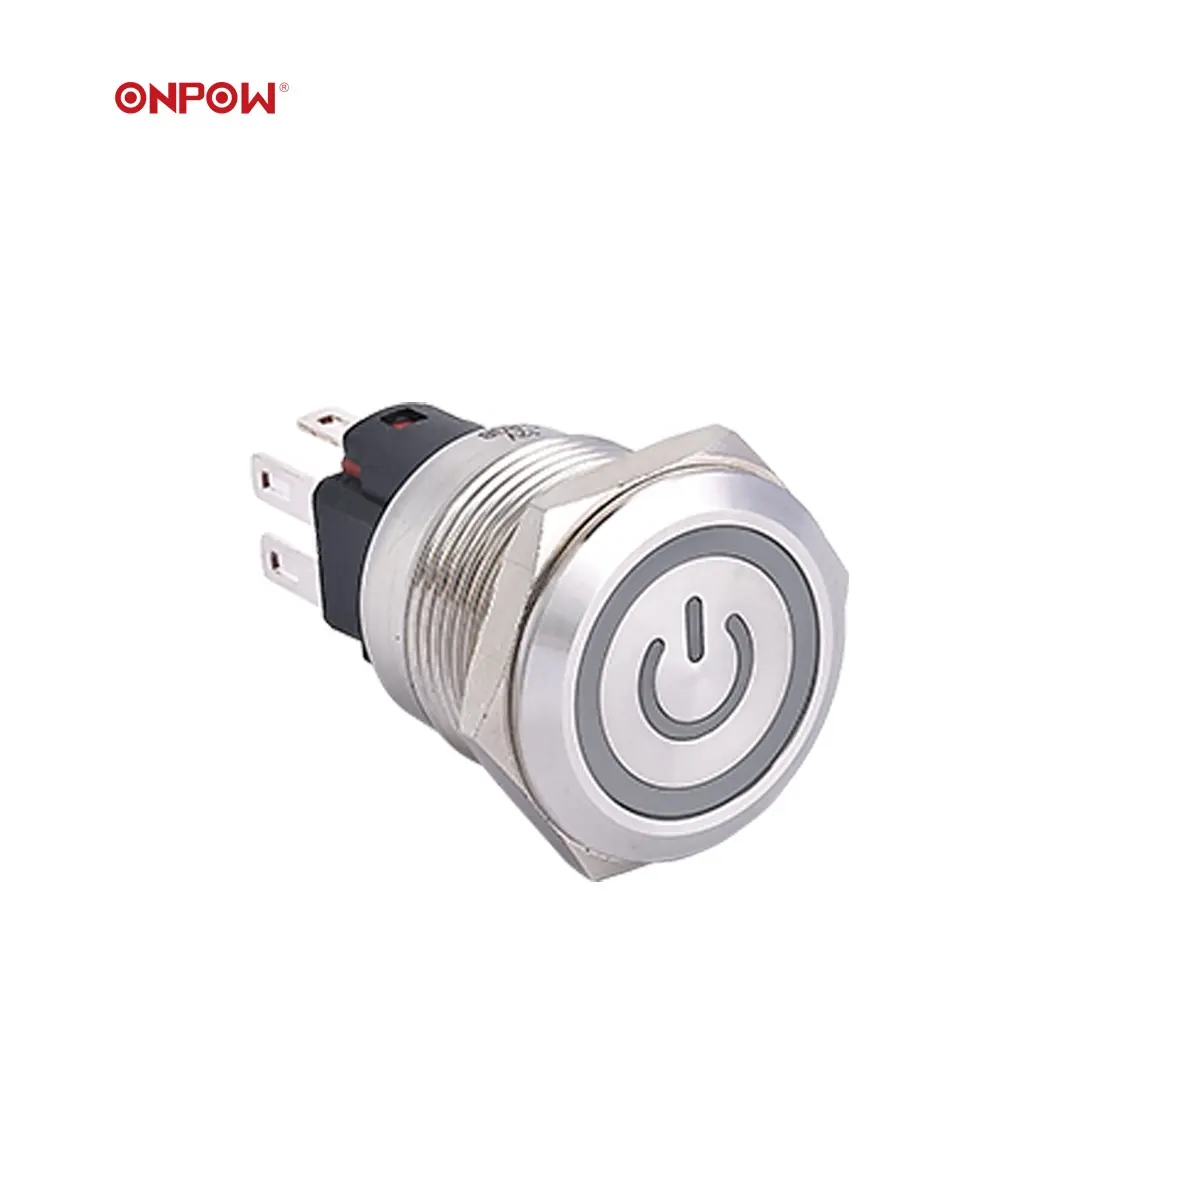 New products ! 16mm ONPOW61 short body LED illuminated on off symbol metal switch power push button switch